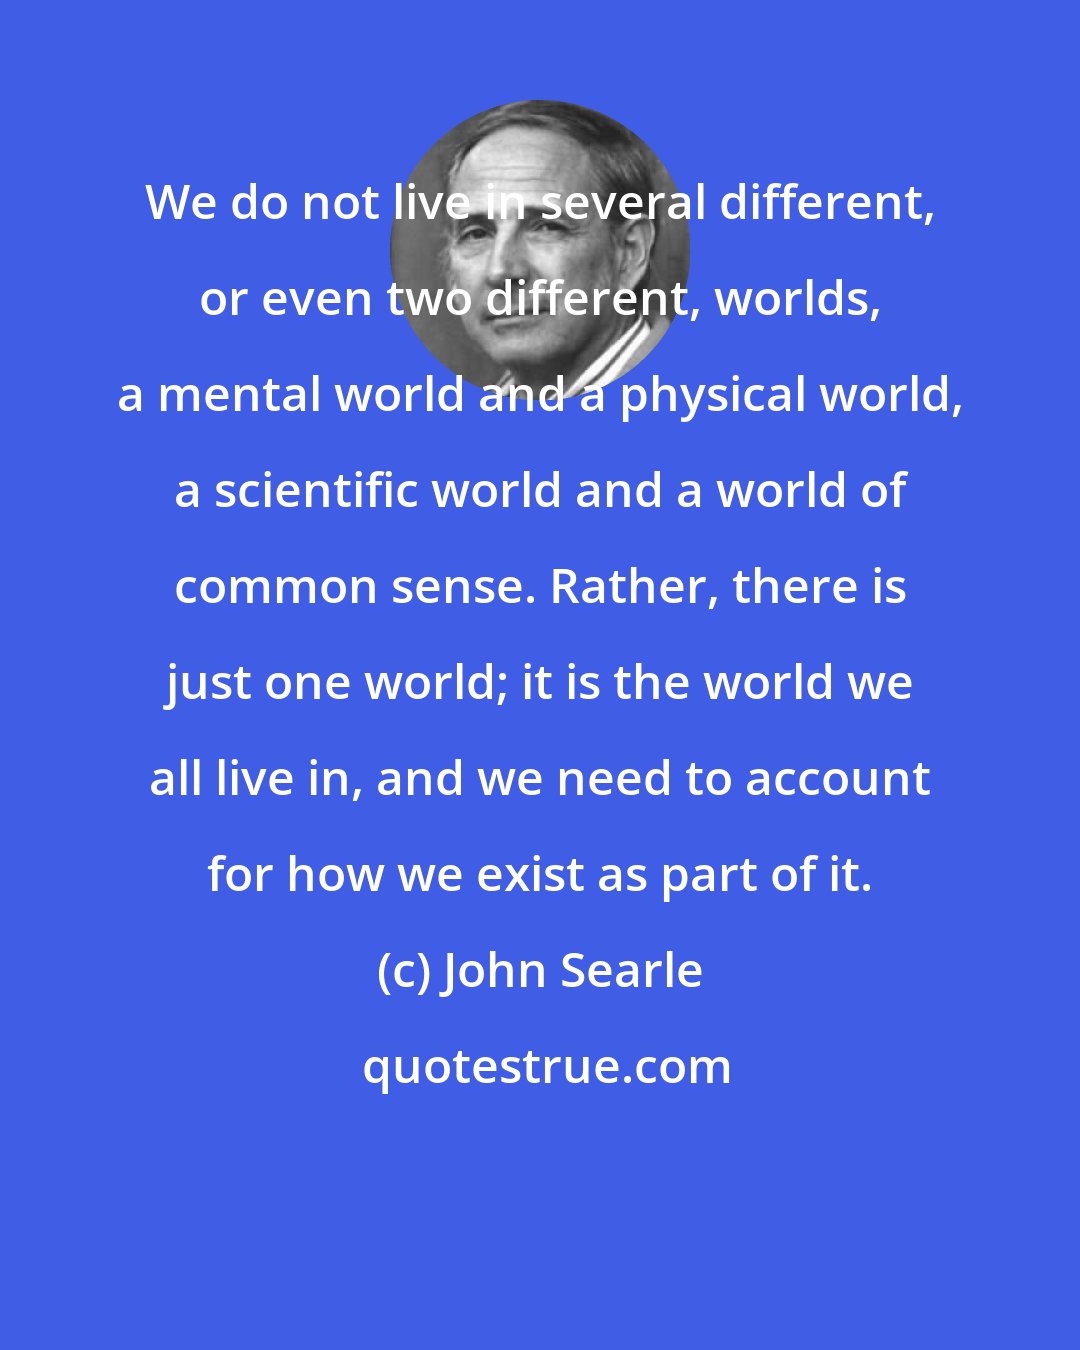 John Searle: We do not live in several different, or even two different, worlds, a mental world and a physical world, a scientific world and a world of common sense. Rather, there is just one world; it is the world we all live in, and we need to account for how we exist as part of it.